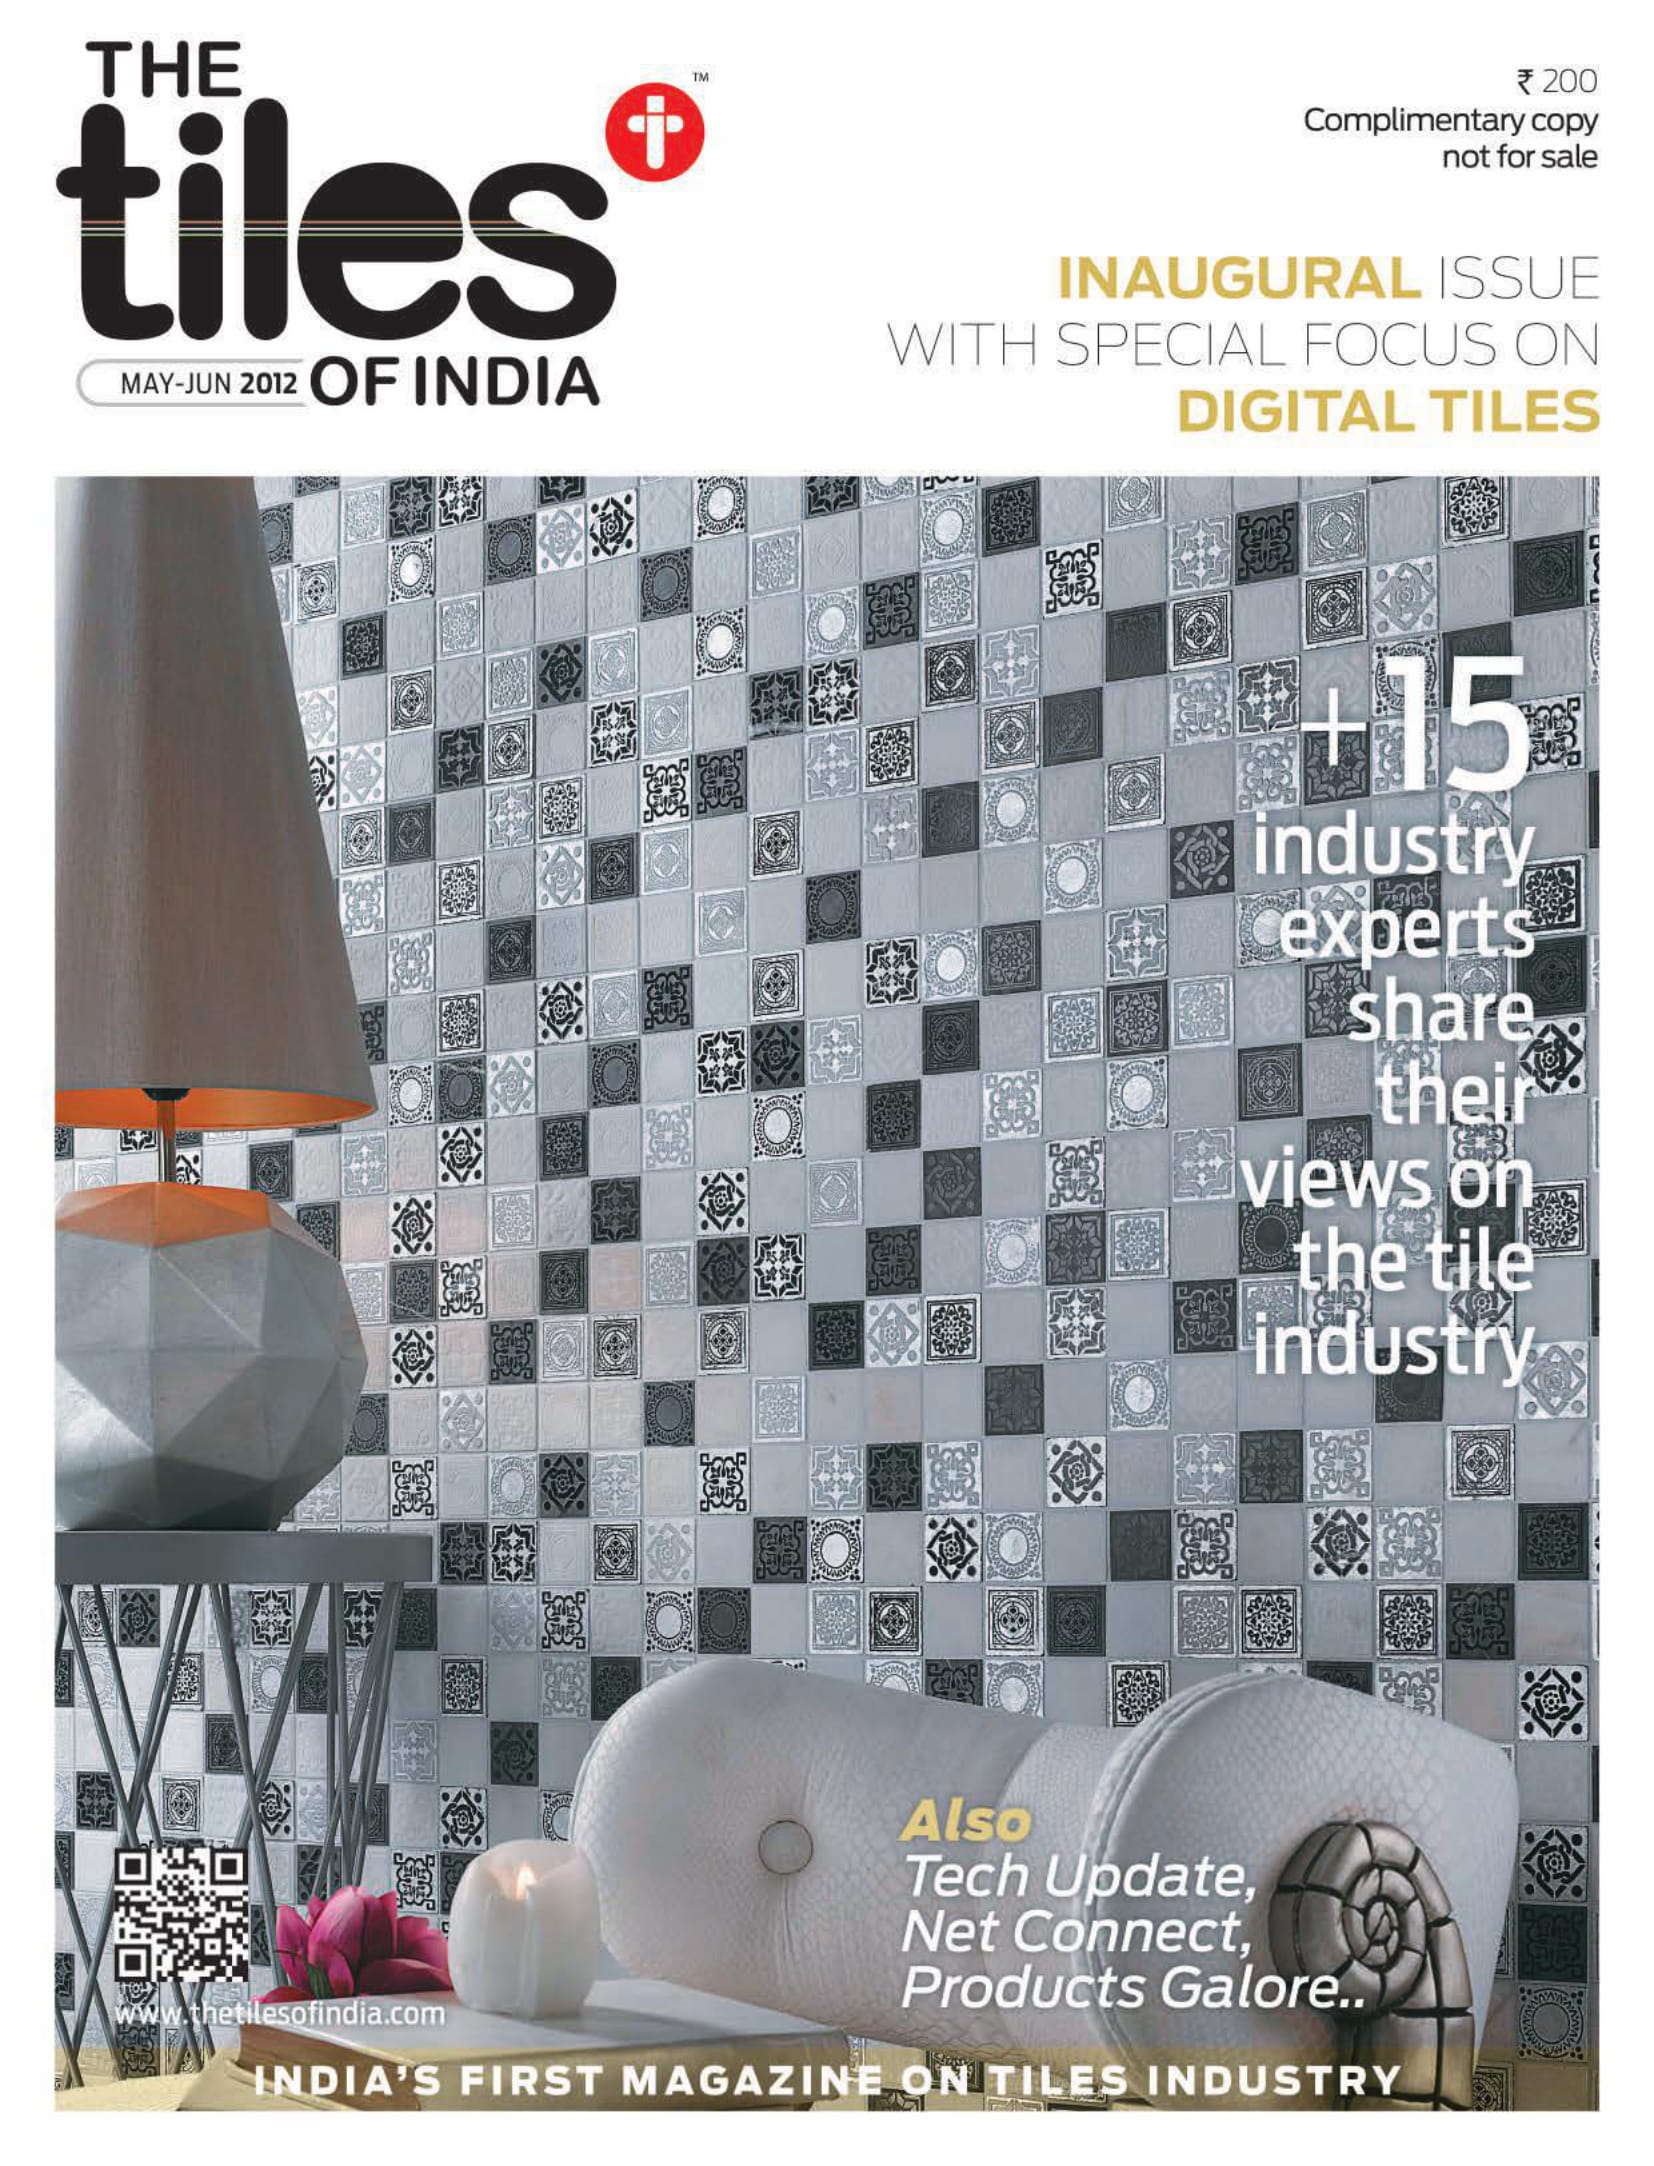 The Tiles of India - 2012 Issues - The Tiles of India